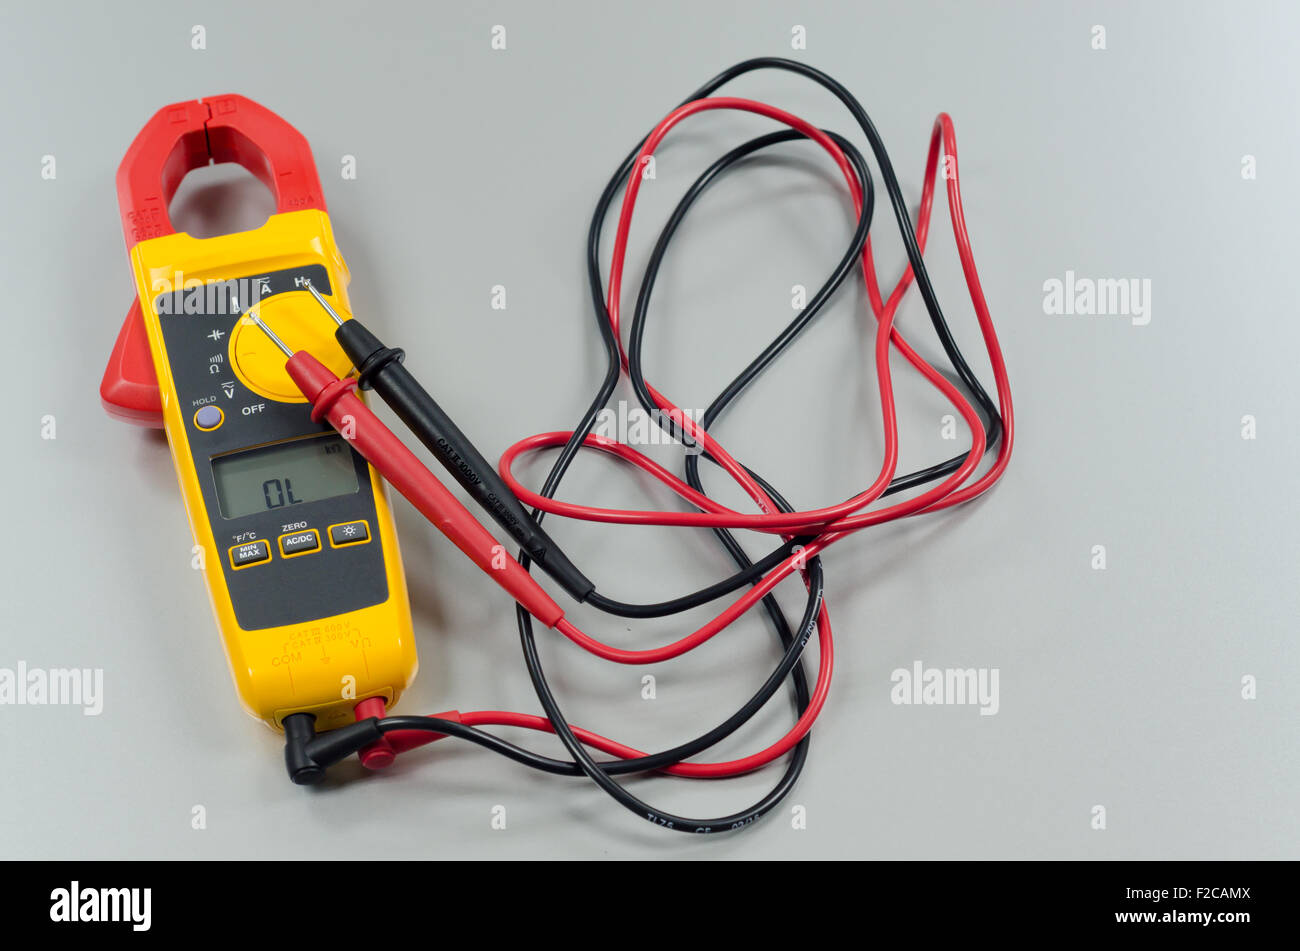 Digital volt meter for Engineering Electrician at work Stock Photo - Alamy